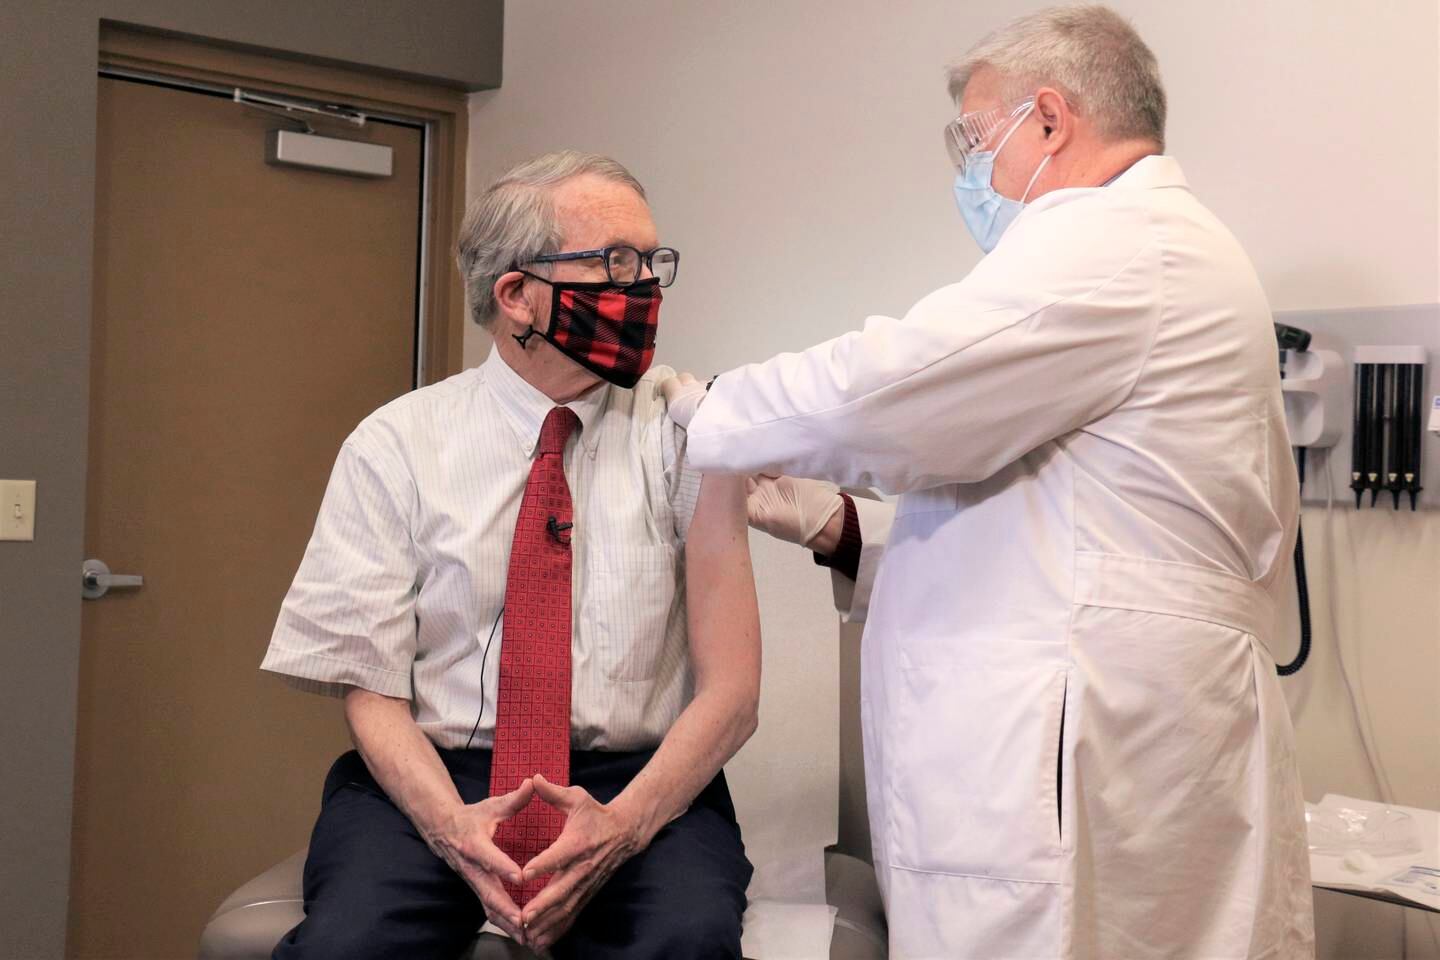 FILE - In this Tuesday, Feb. 2, 2021 photo provided by the Ohio Governor's Office, Gov. Mike DeWine, left, gets his first dose of the COVID-19 vaccine from Dr. Kevin Sharrett, in Jamestown, Ohio. On Friday, April 9, 2021, The Associated Press reported on stories circulating online incorrectly asserting masks are no longer mandatory in Ohio, and DeWine isnt saying a word about it. But masks remain mandatory in Ohio in indoor spaces as well as outdoors when social distancing is not possible. Ohio rescinded its previous coronavirus health orders on April 5, but the state issued a new order the same day simplifying the guidelines. (Ohio Governor's Office via AP)